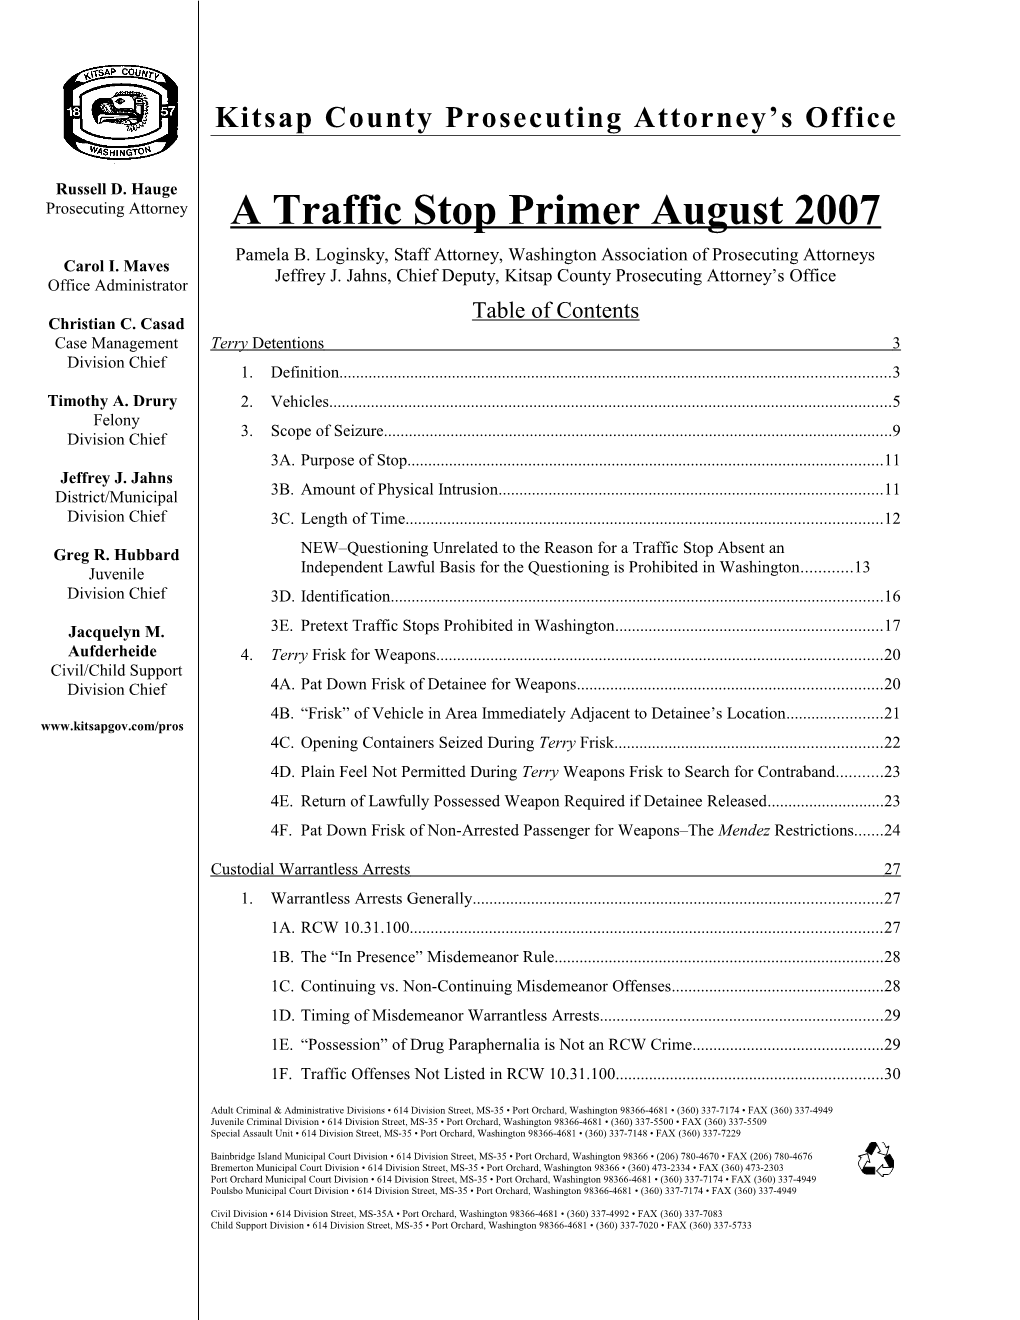 A Traffic Stop Primer August 2007